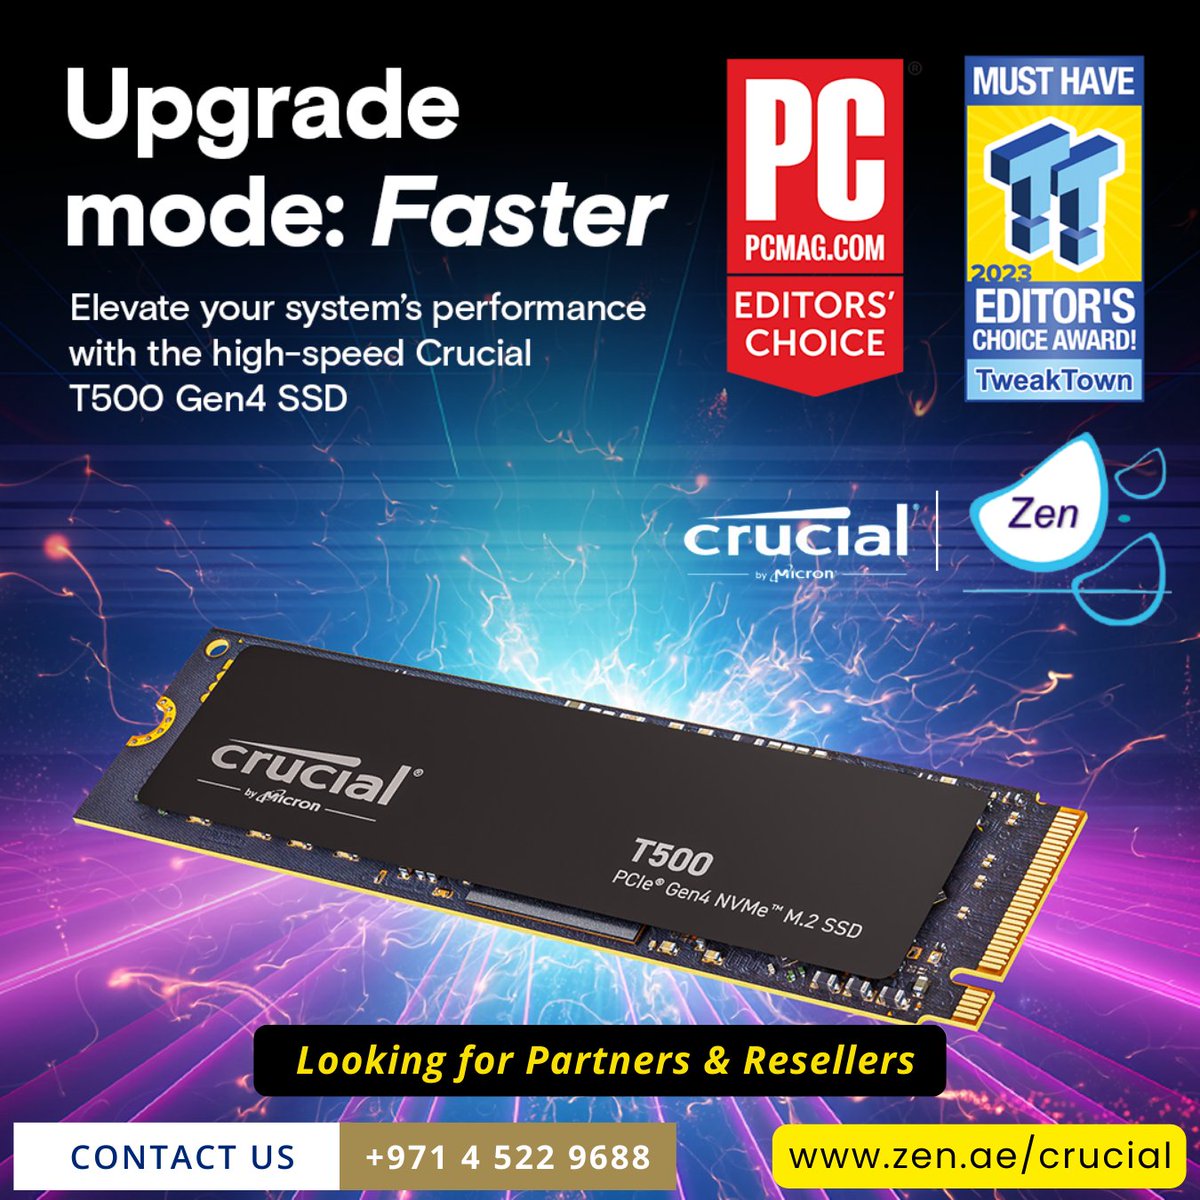 #crucial  Crucial T500 Gen4 SSD
 
Looking for partners & resellers.

smpl.is/8nm0u

#3cx #zenitdxb #zenit #businesscommunication #dubaistartup #3cxhosting #simhosting #saudistartups